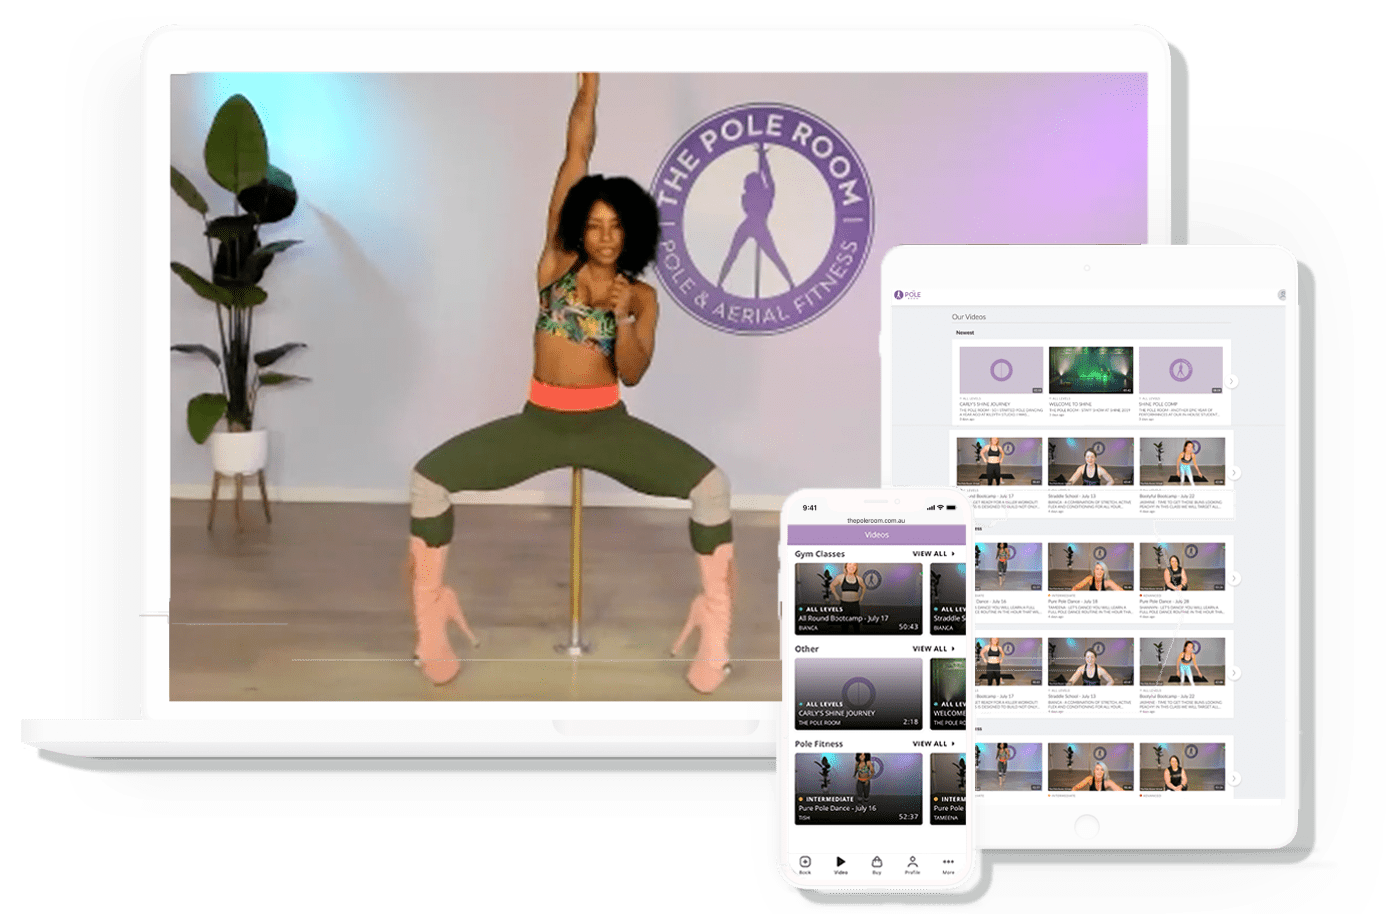 A POLE DANCE STUDIO IN YOUR POCKET